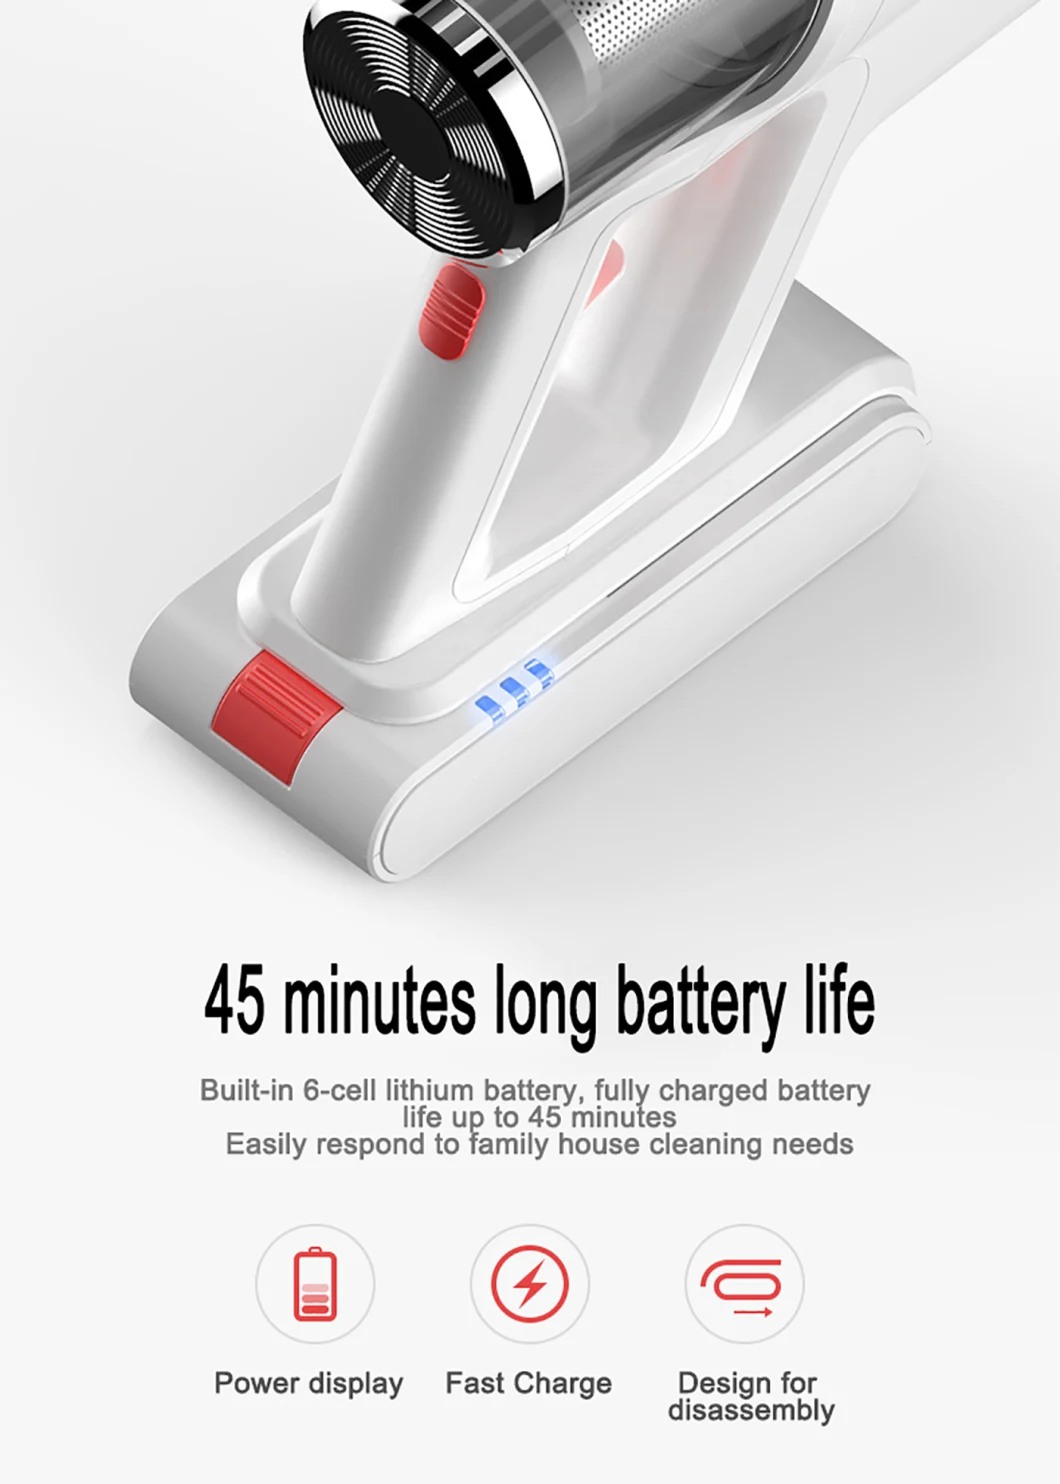 Home vacuum Bagless Cyclone Portable Rechargeable Handheld Wireless Cordless Vacuum Cleaner for Sale